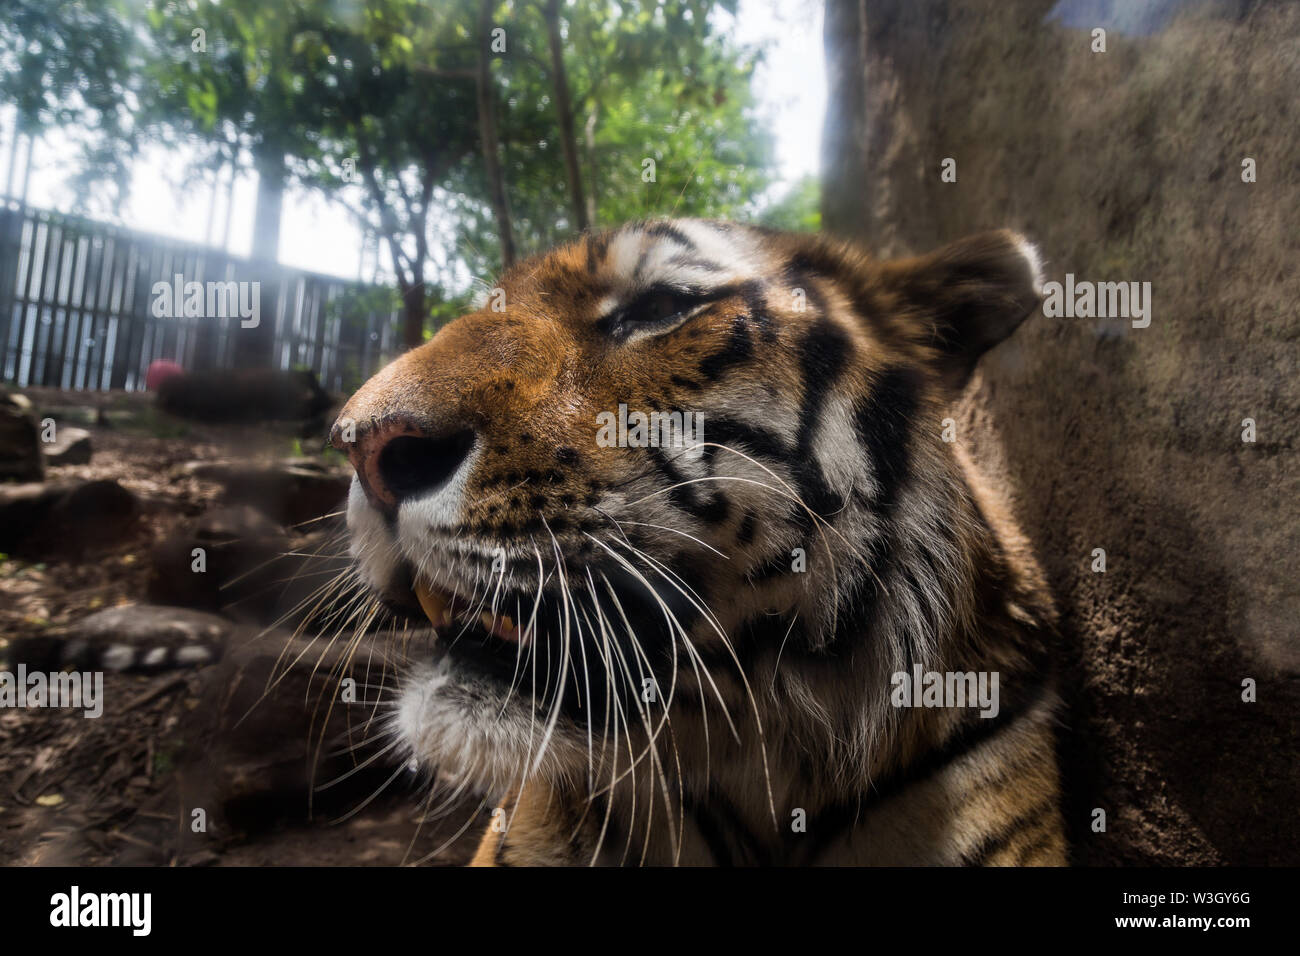 Up close with a captive Amur tiger, also known as the Siberian tiger, at the Indianapolis Zoo. Stock Photo